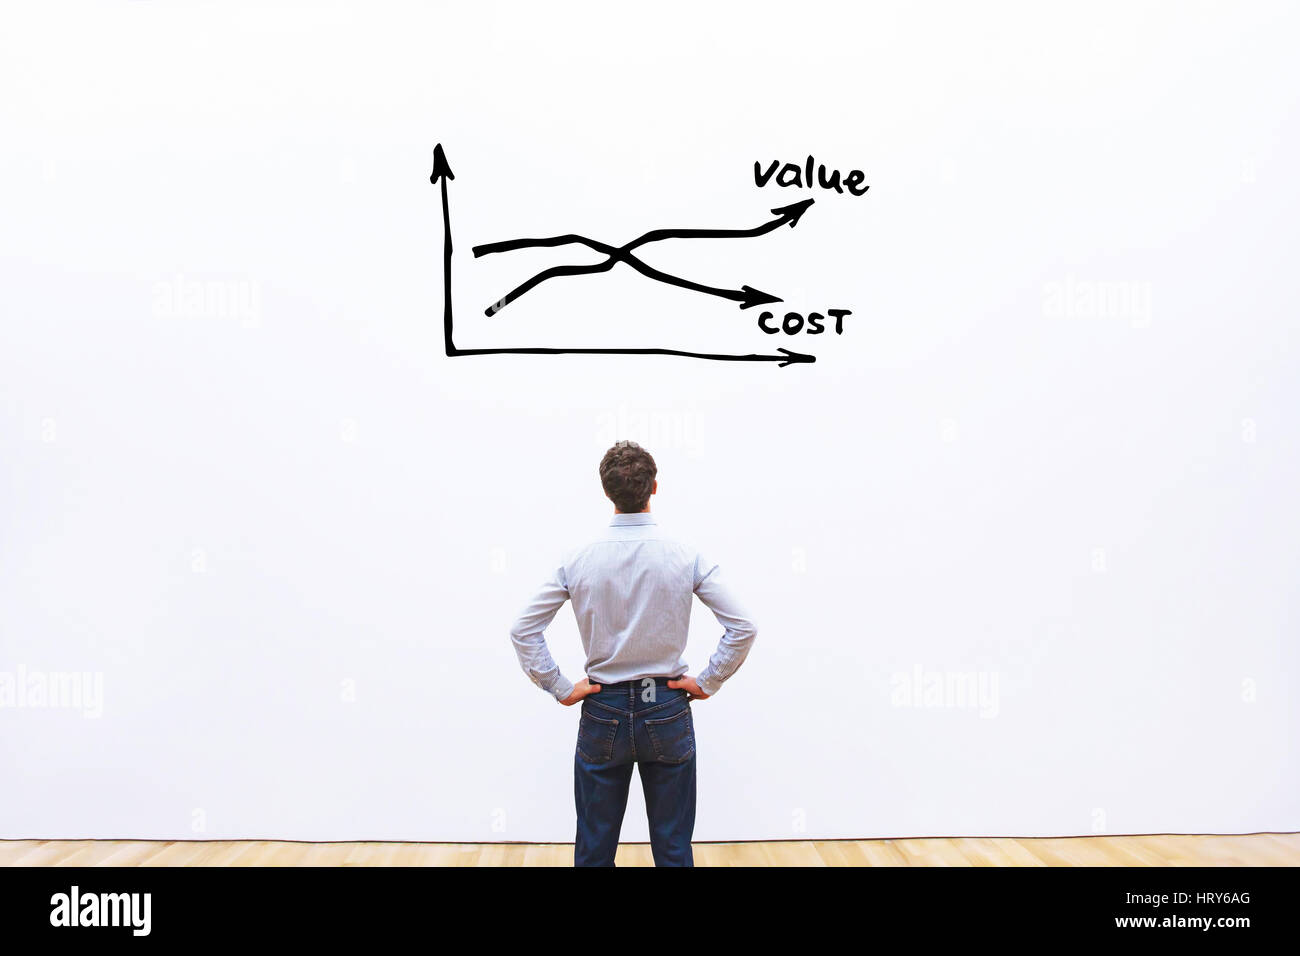 decrease cost and increase value business concept, businessman analyzing graph Stock Photo